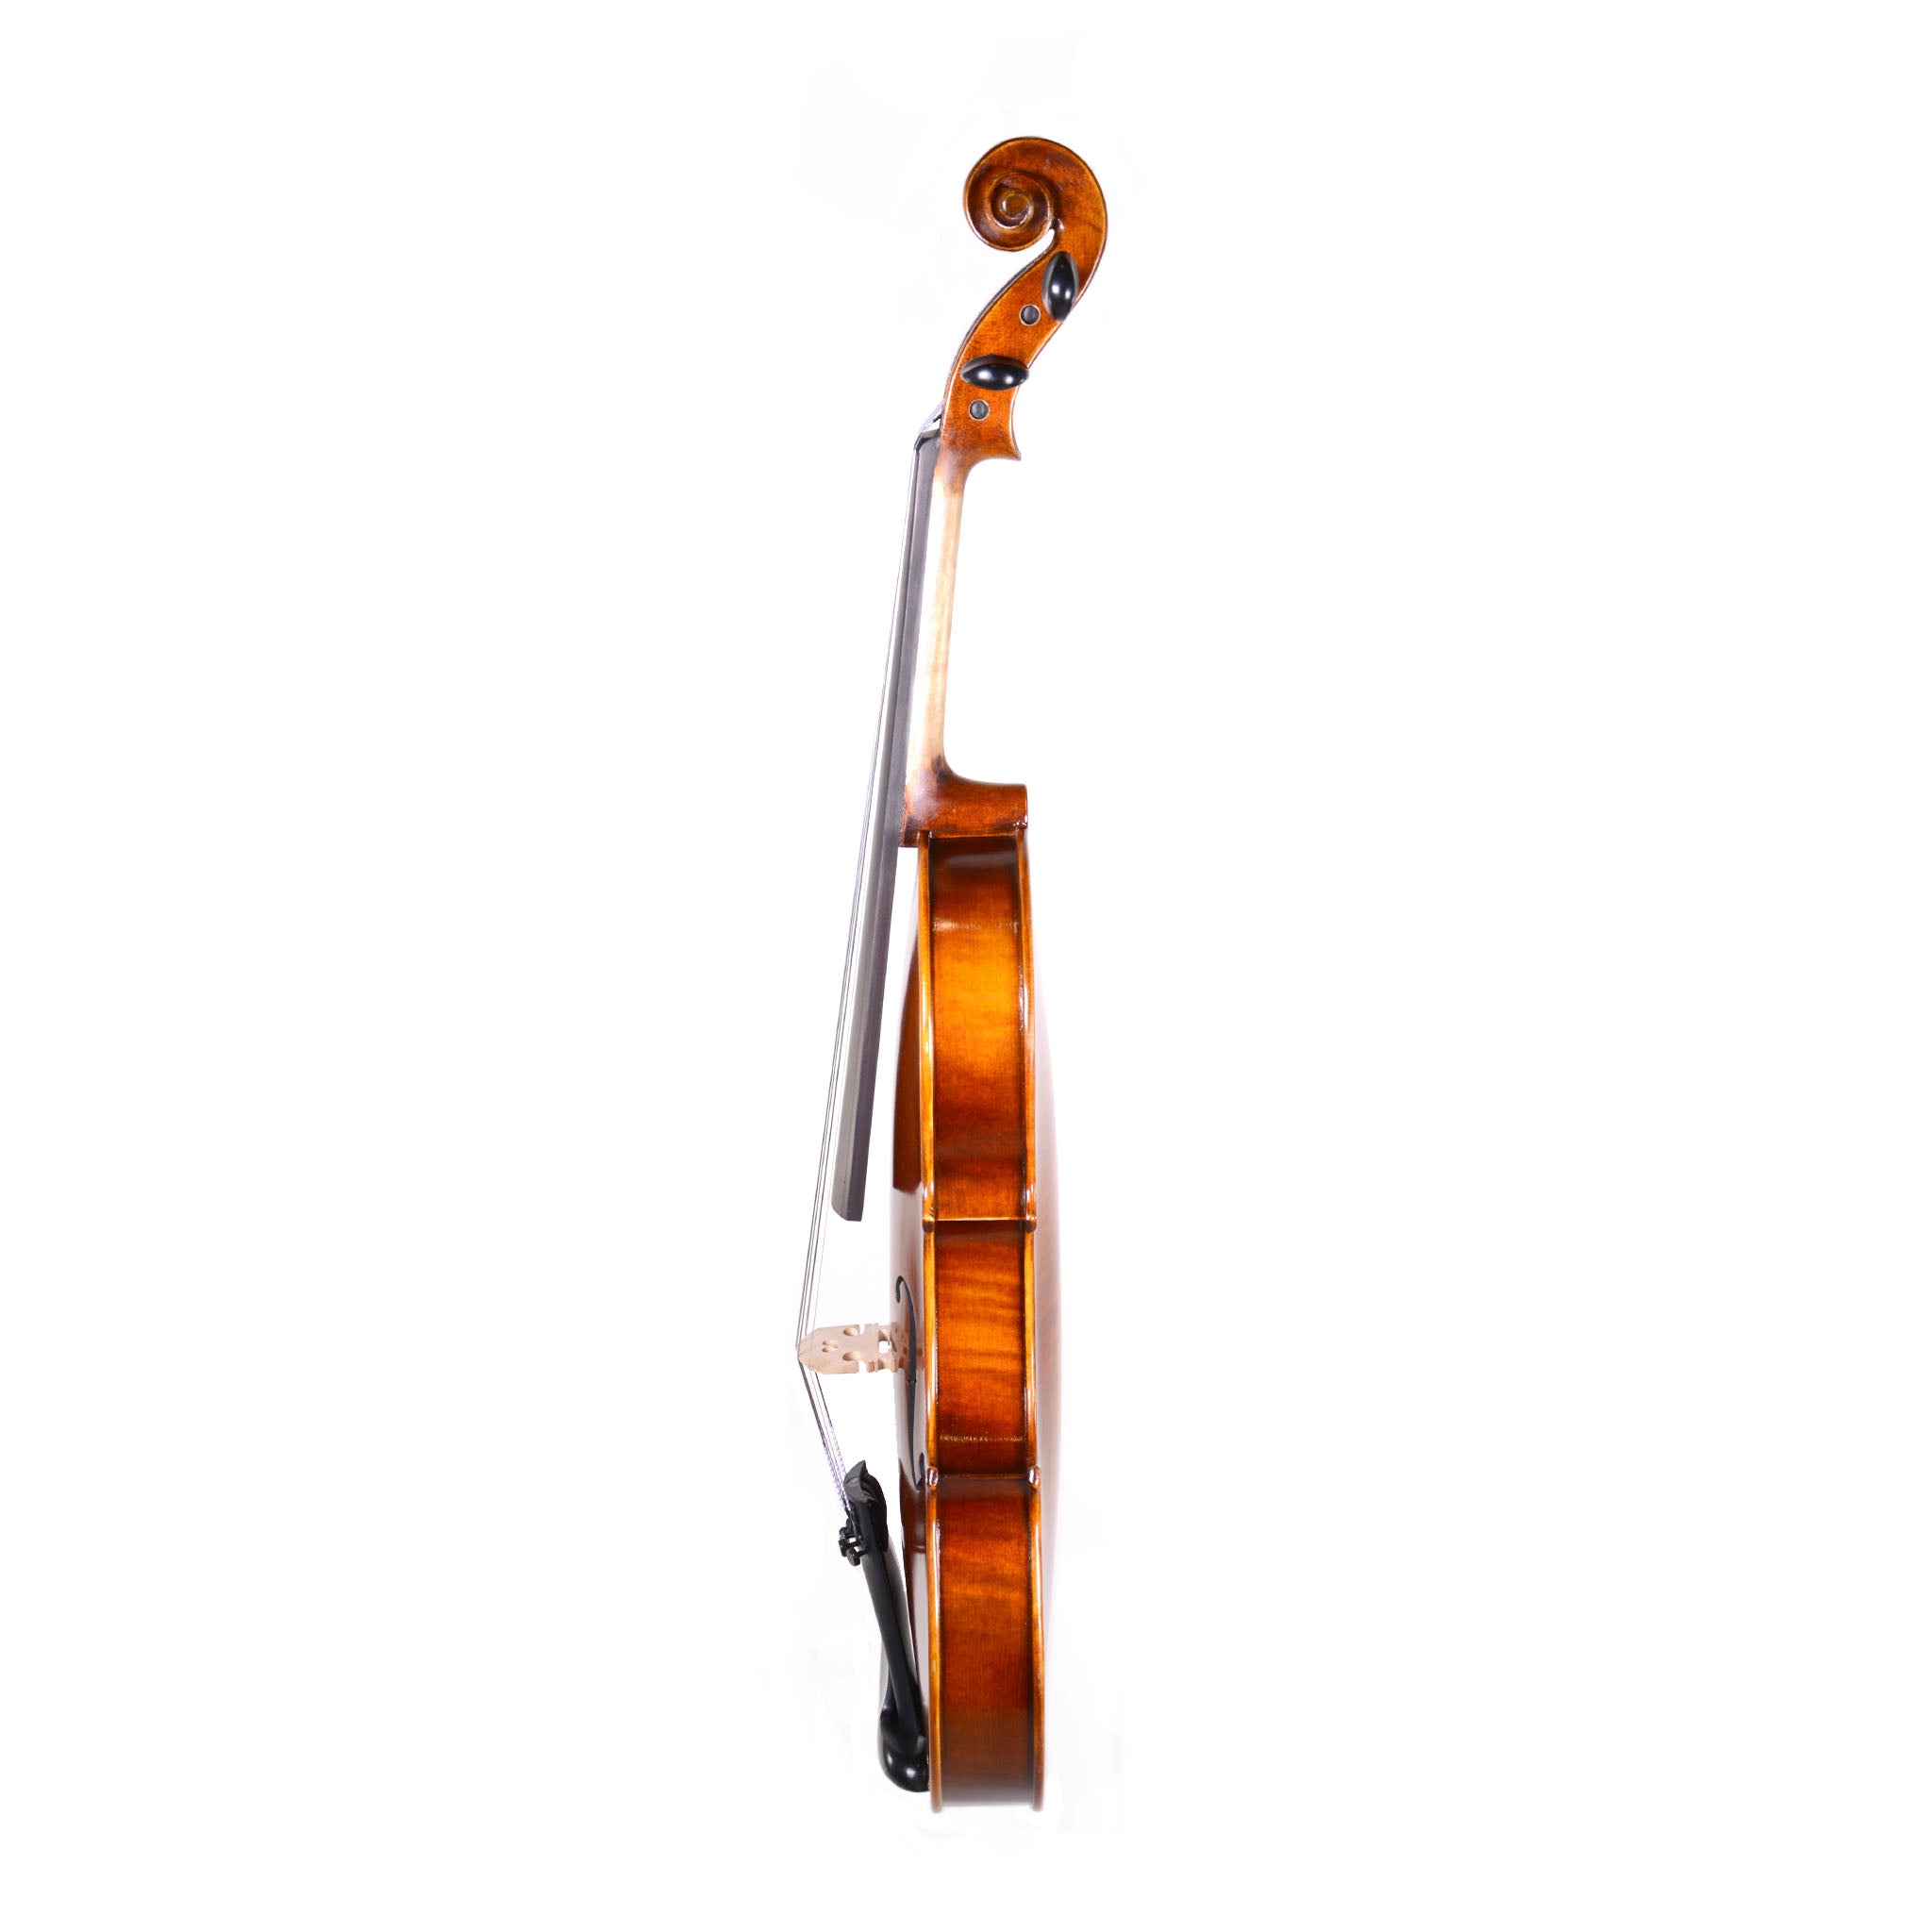 B-Stock Fiddlerman Concert Violin Outfit